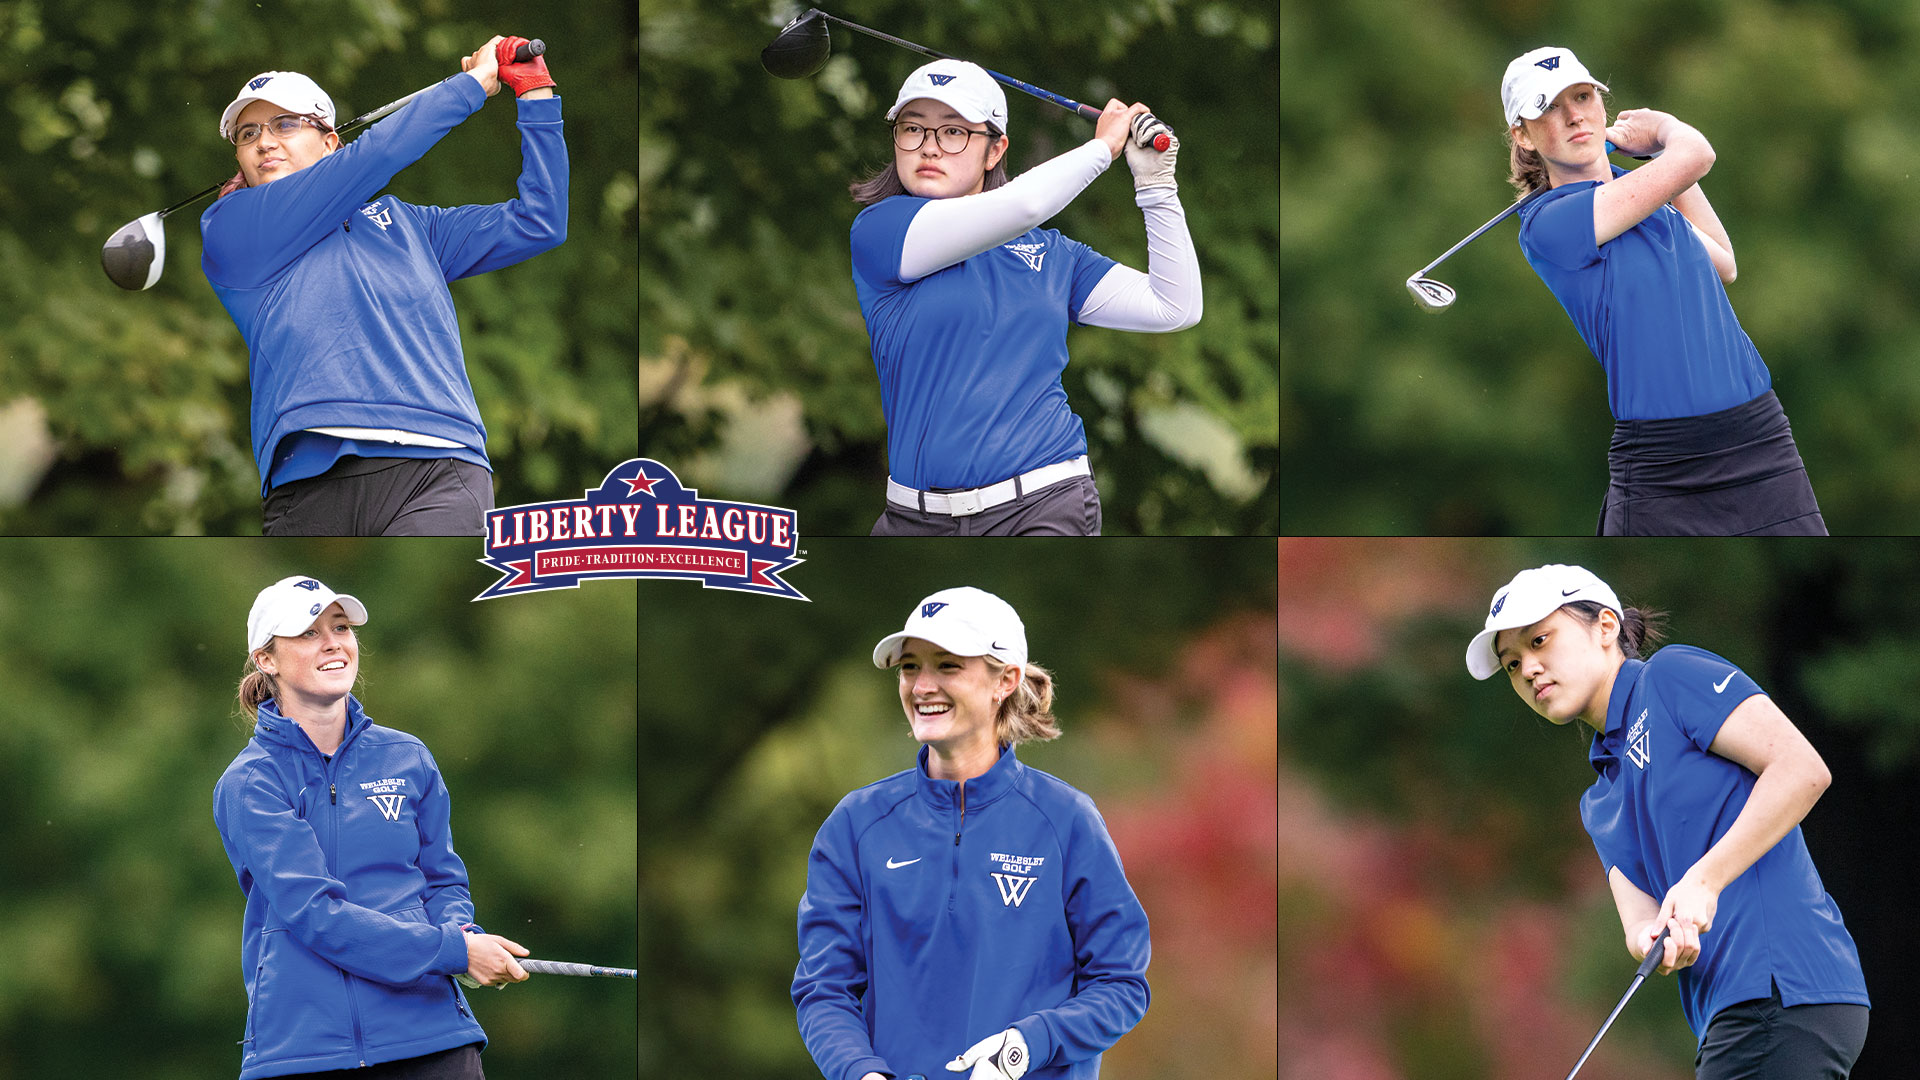 Six named to Liberty League All-Academic Team (Frank Poulin Photography).